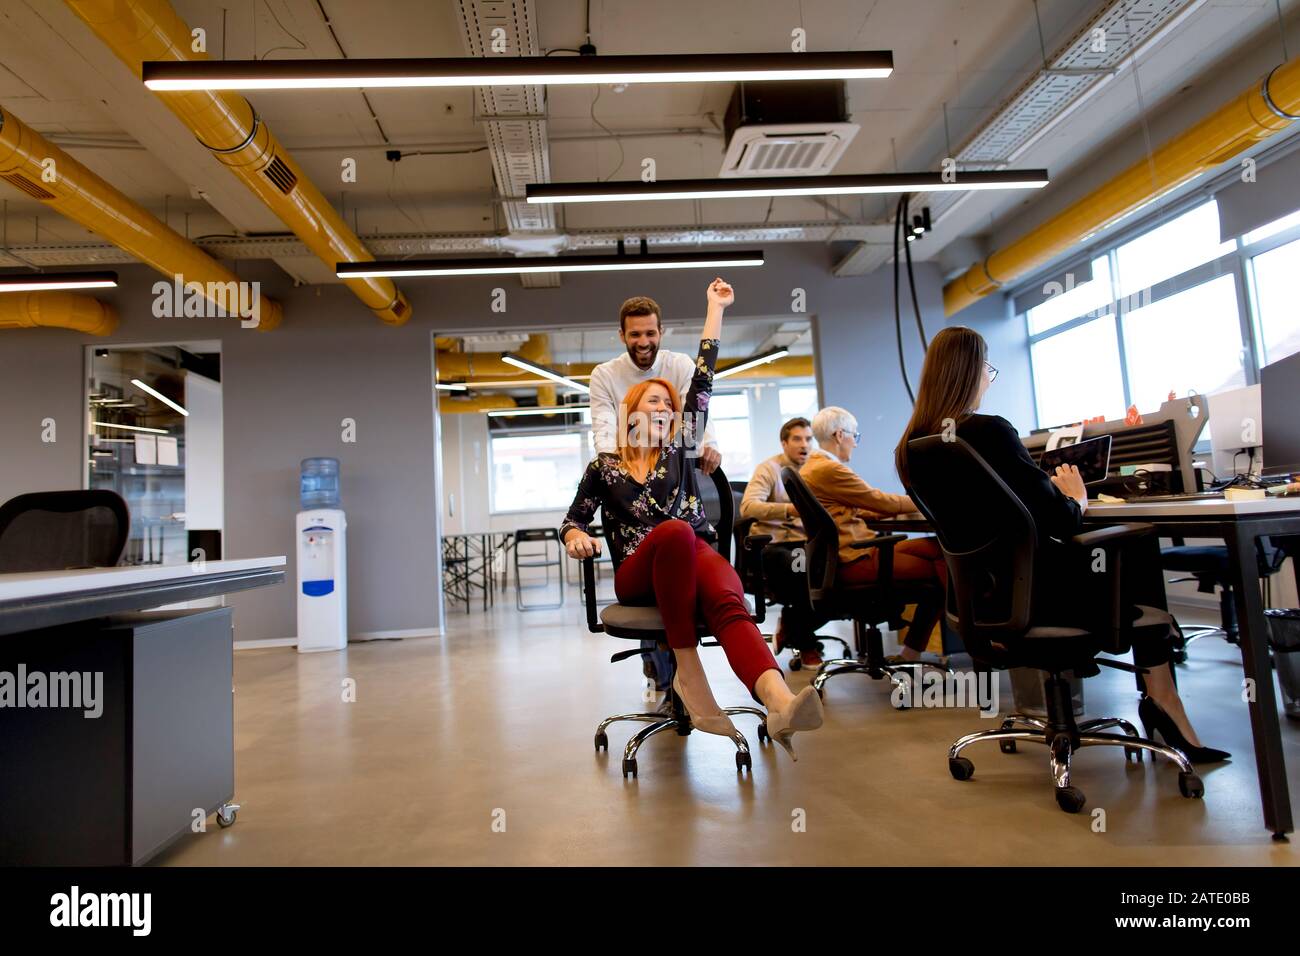 Young cheerful business people in smart casual wear having fun while racing on office chairs and smiling Stock Photo